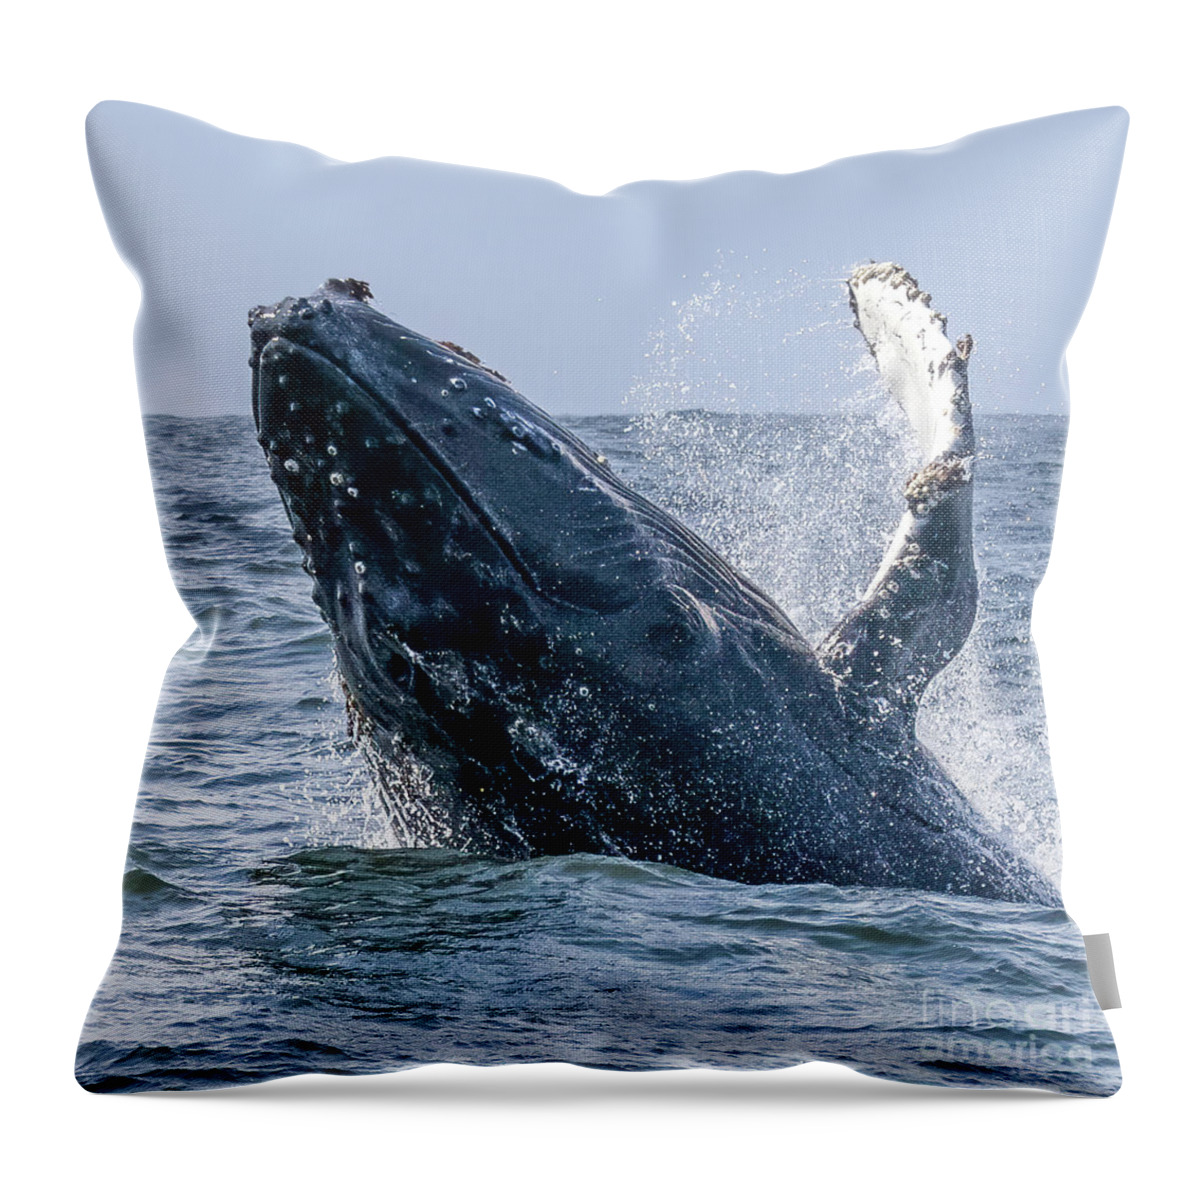  Throw Pillow featuring the photograph Baby Humpback Monterey by Loriannah Hespe